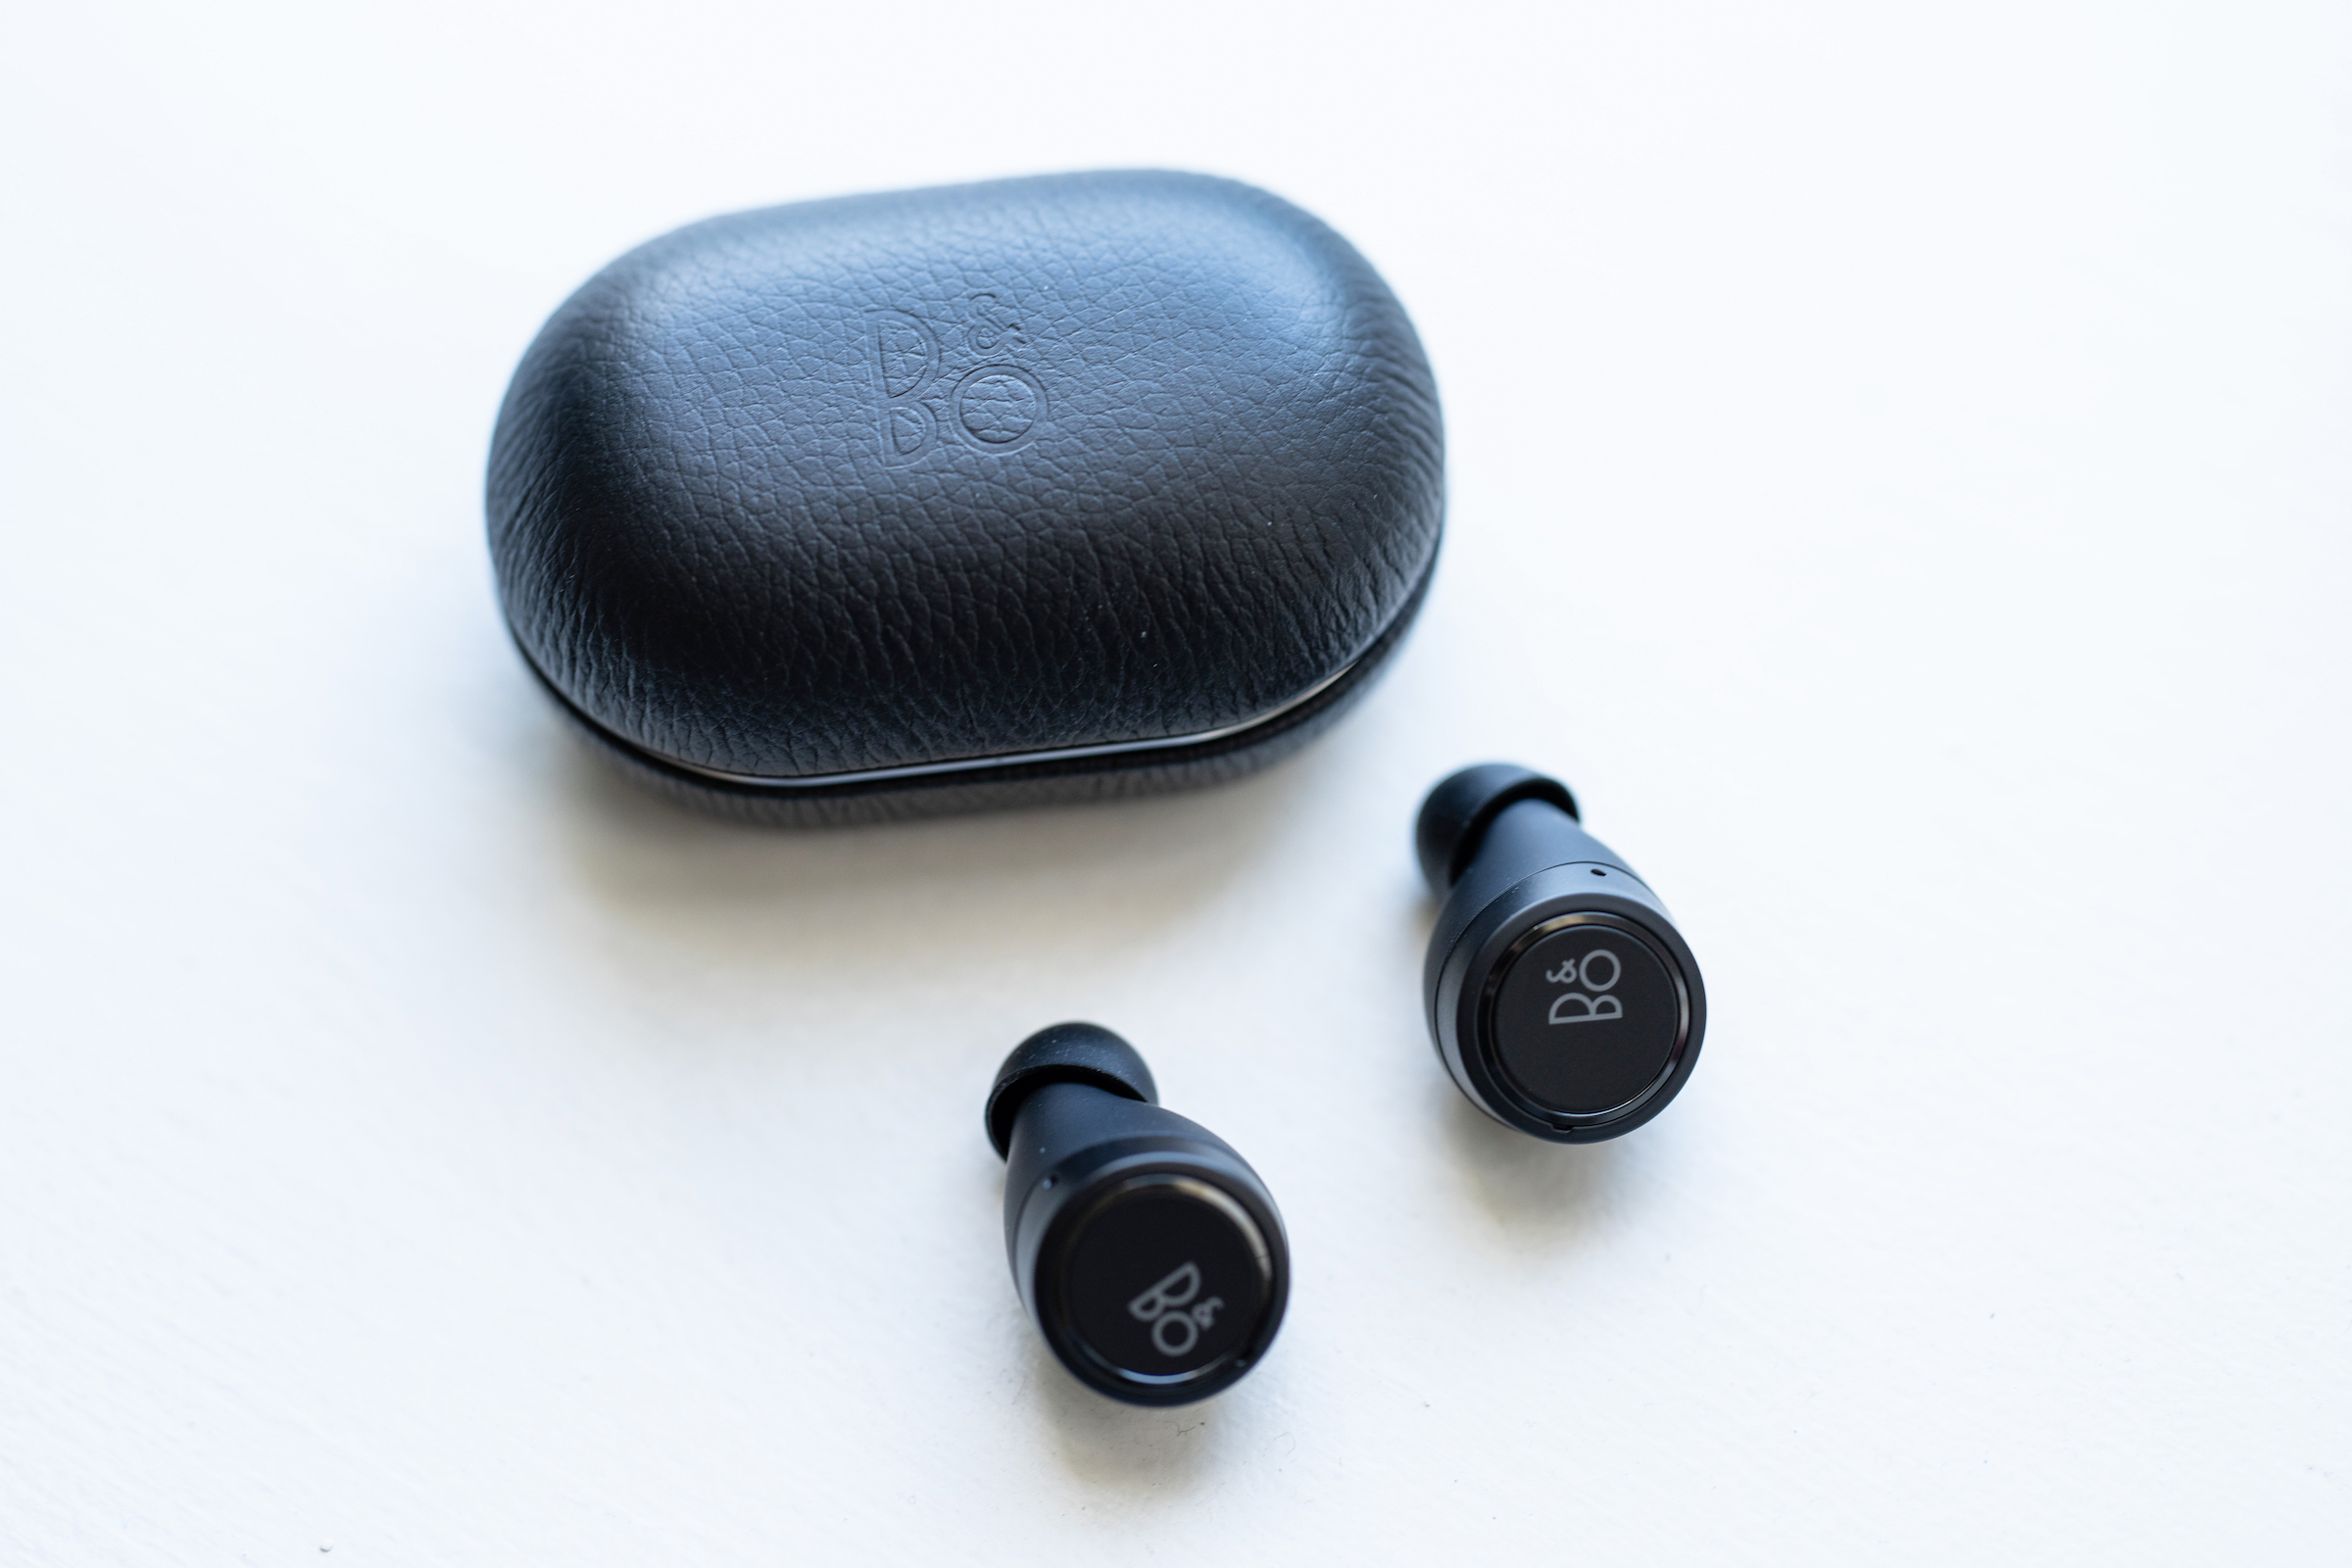 Bang & Olufsen’s latest Beoplay E8 fully wireless earbuds offer top sound and comfort